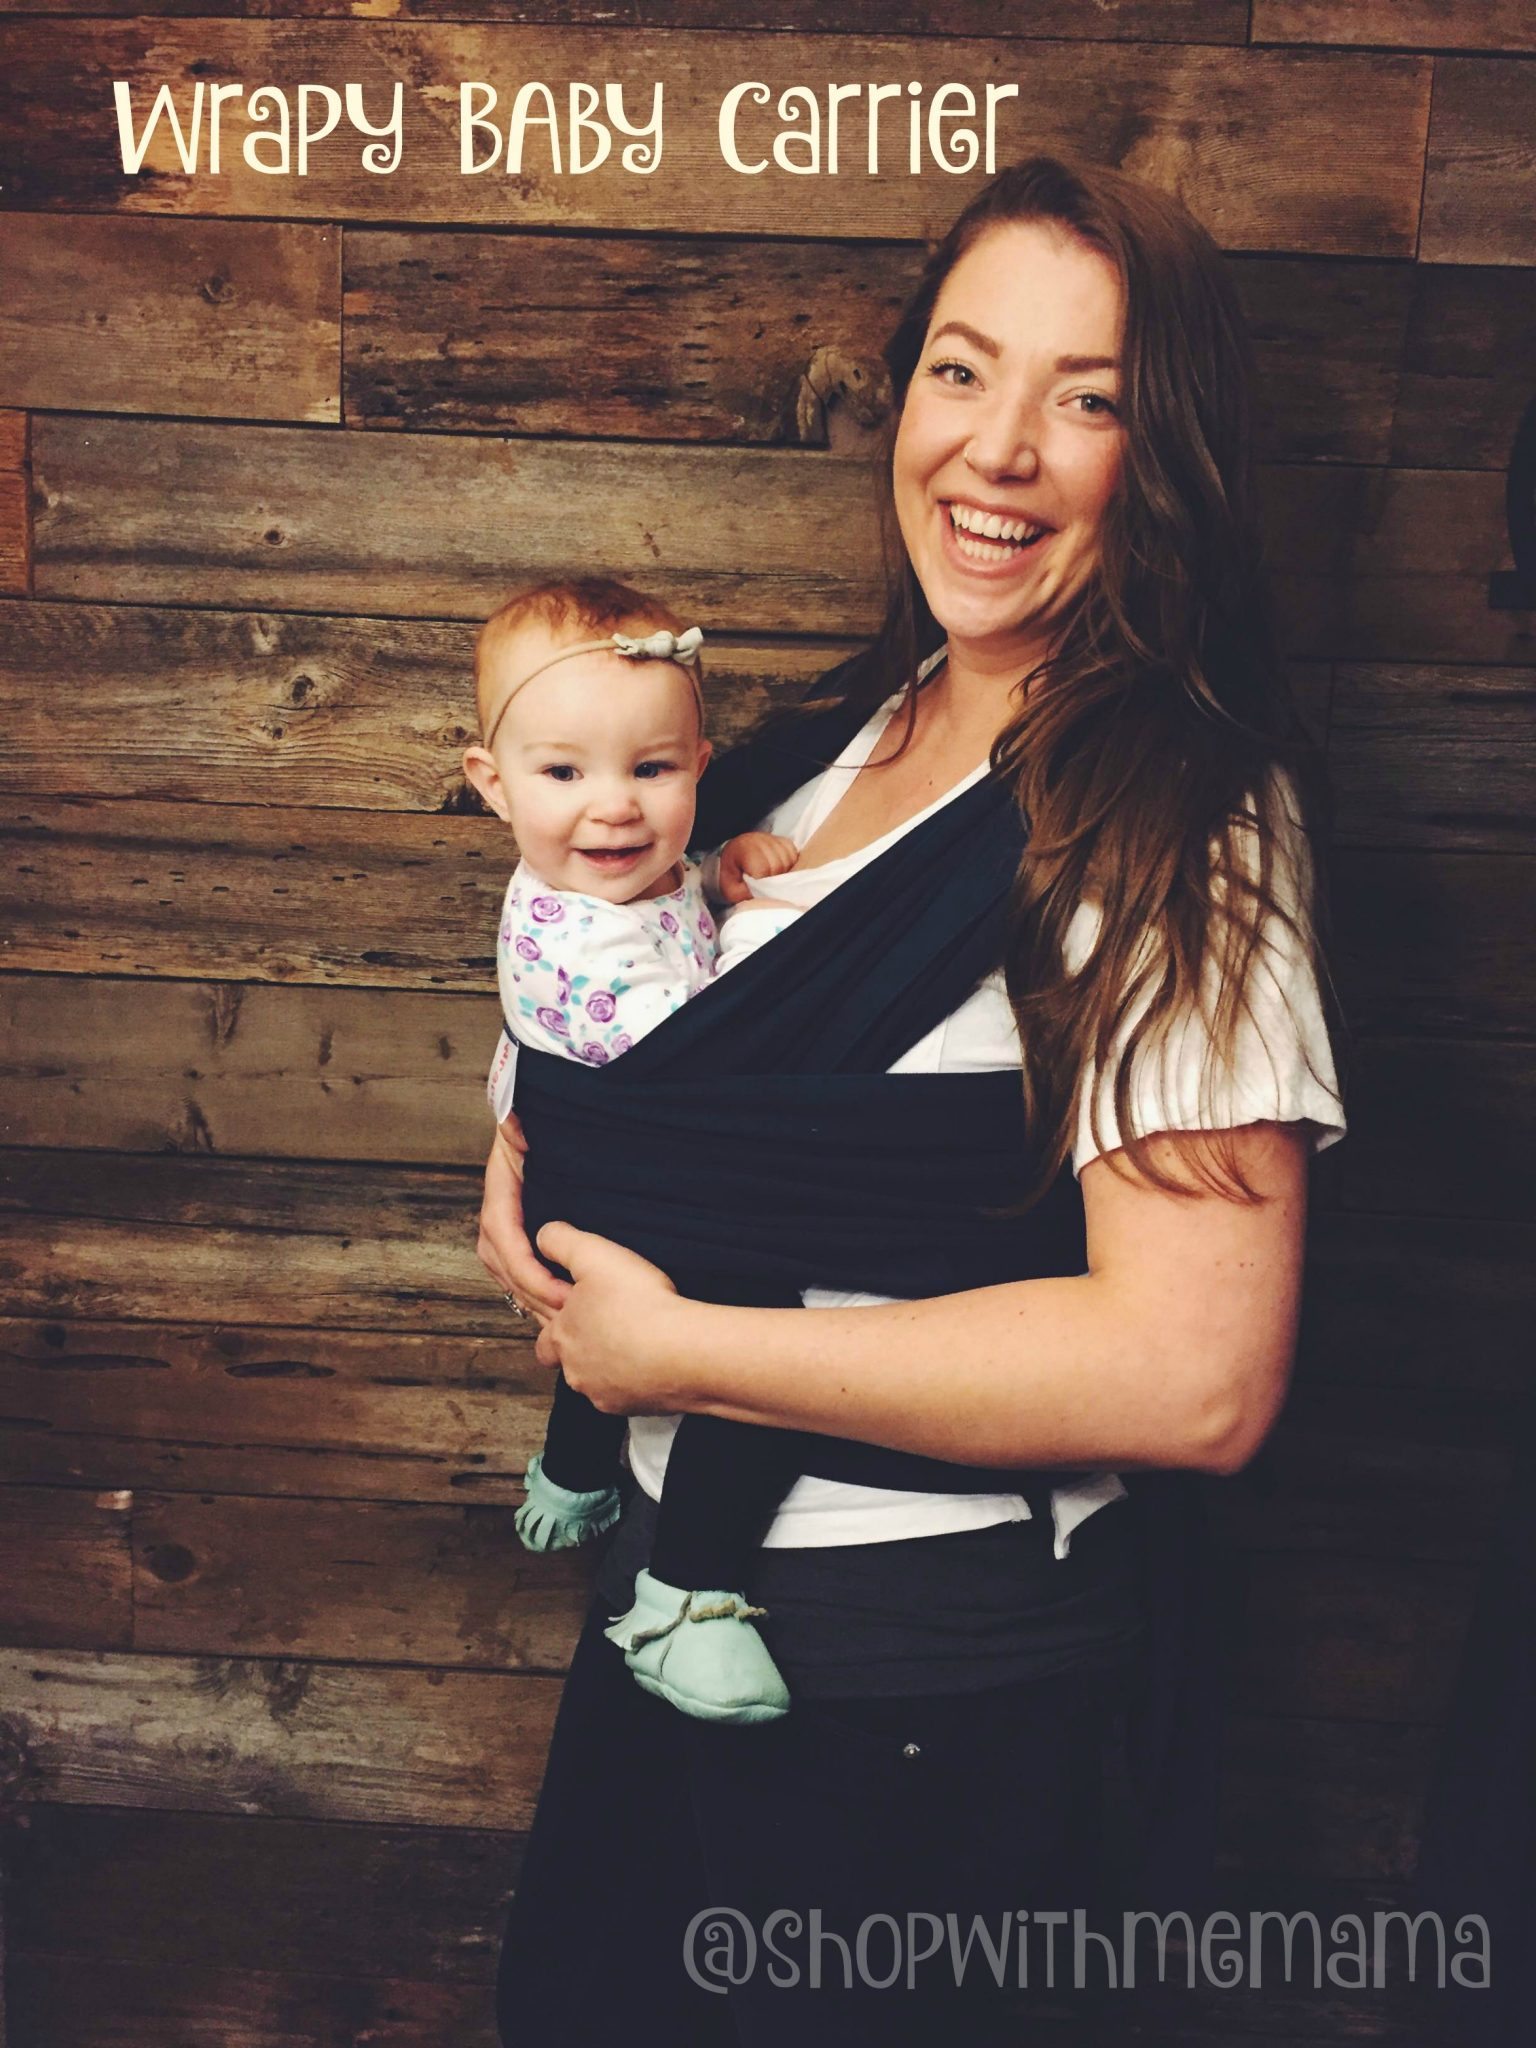 Wrapy Baby Carrier